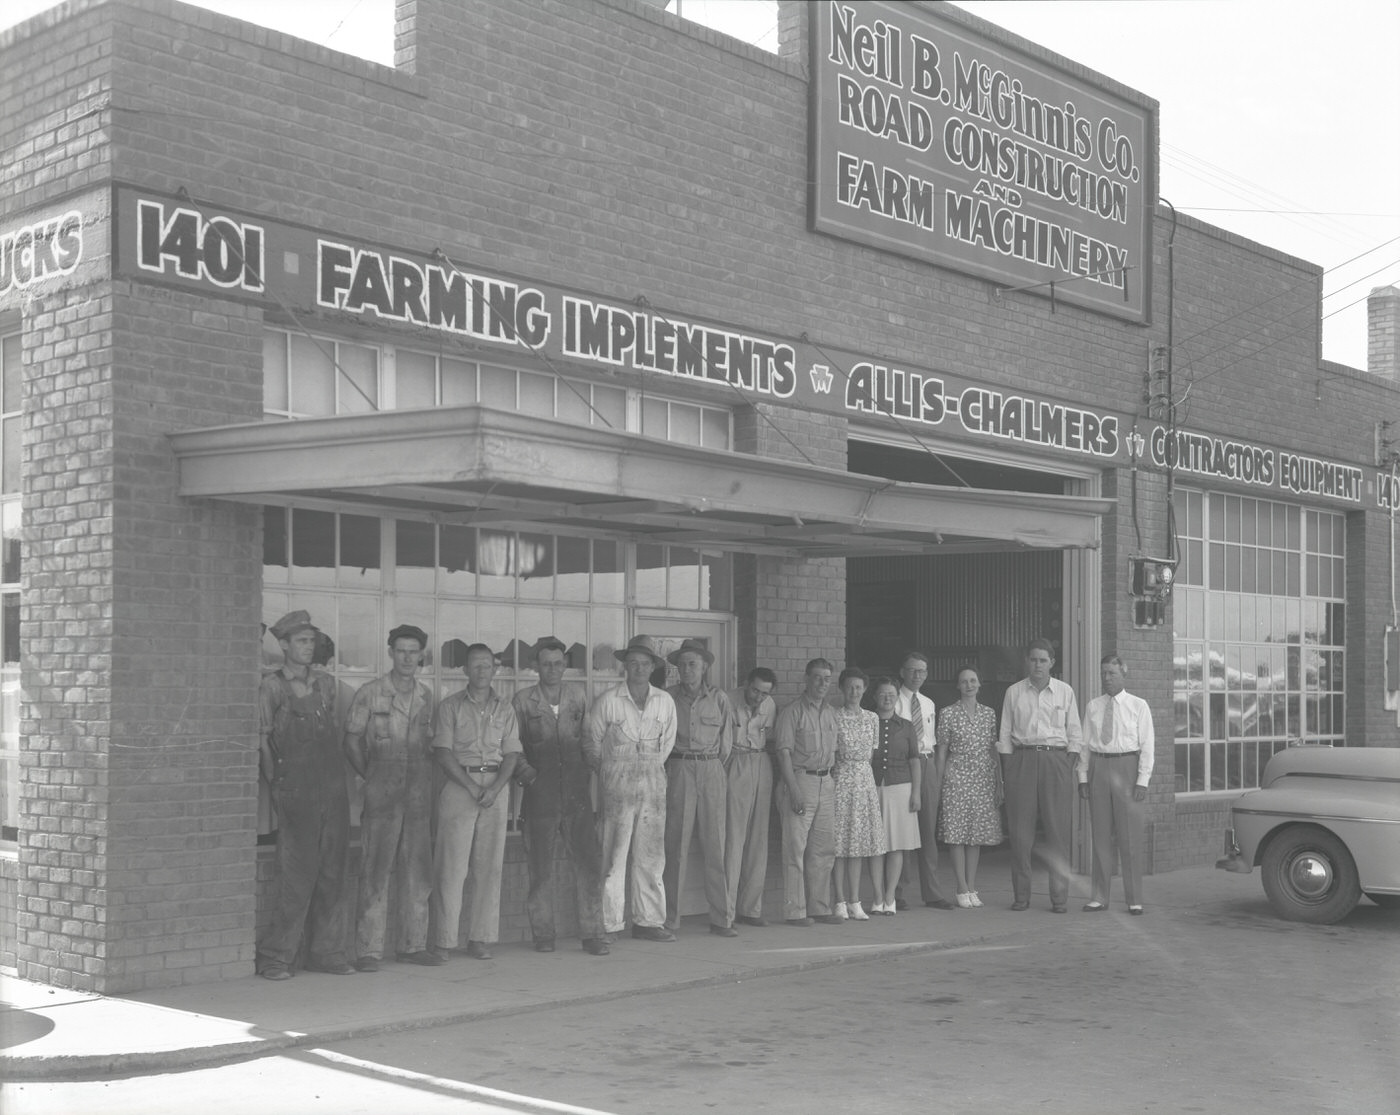 Employees in Front of Neil B. McGinnis Co. Building, 1943